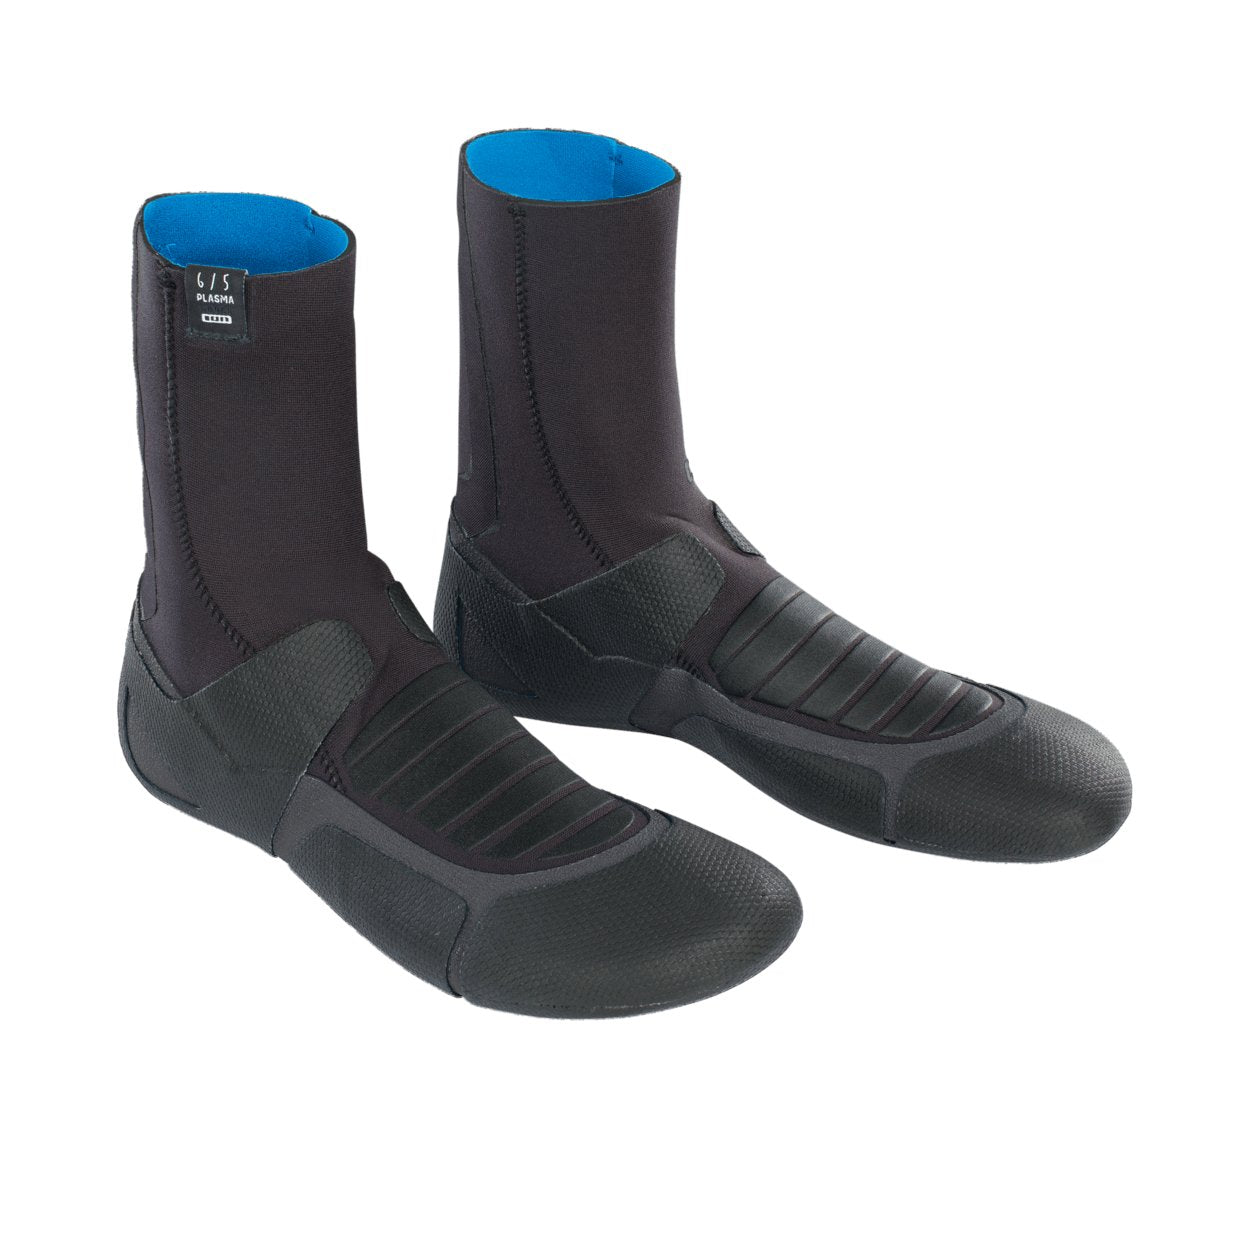 ION Plasma Boots 6/5 Round Toe 2022 - Worthing Watersports - 9010583059419 - Footwear - ION Water